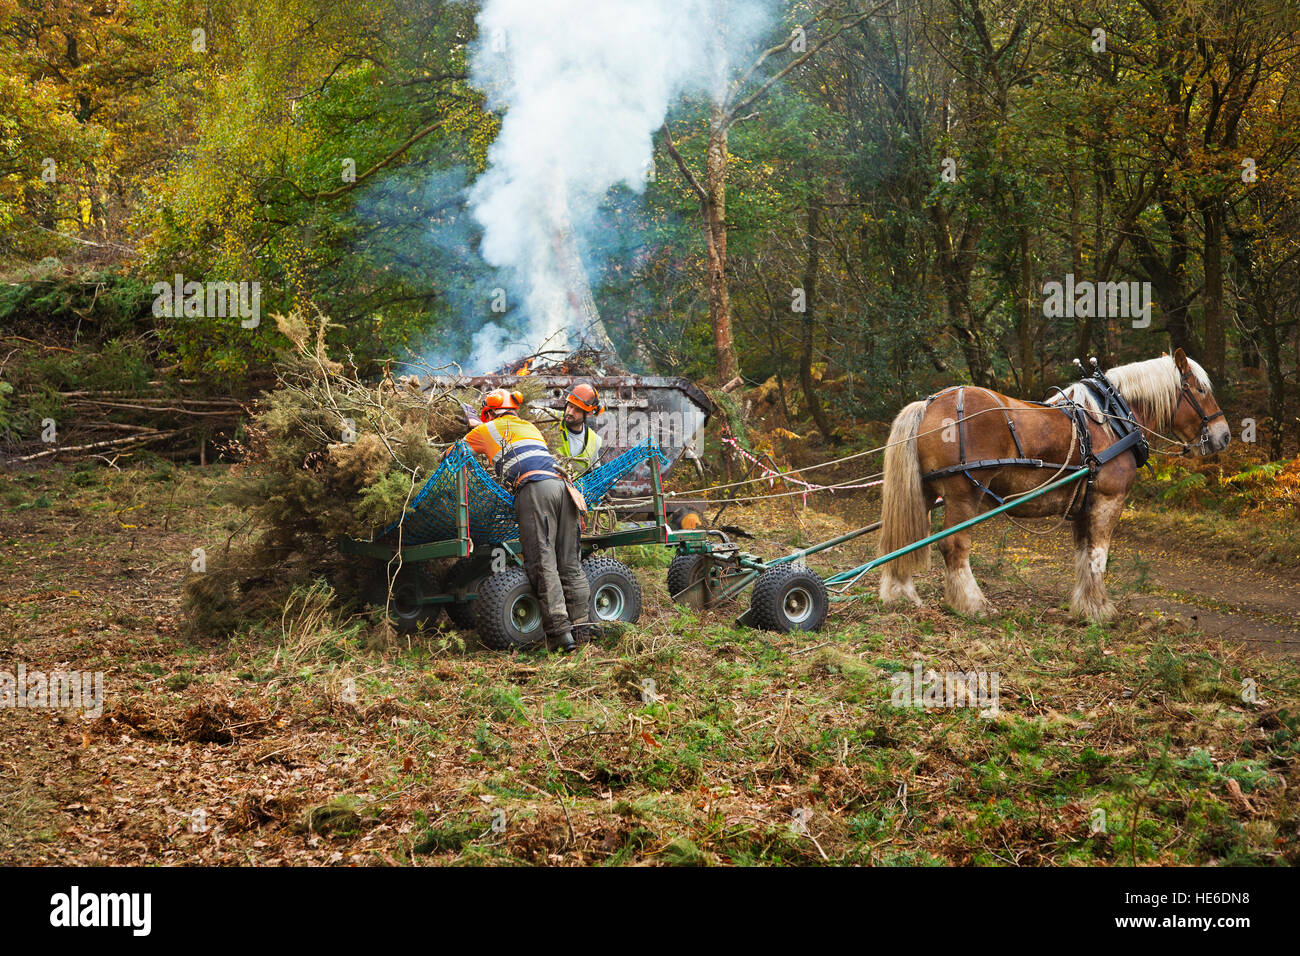 A Horse doing forestry work Stock Photo